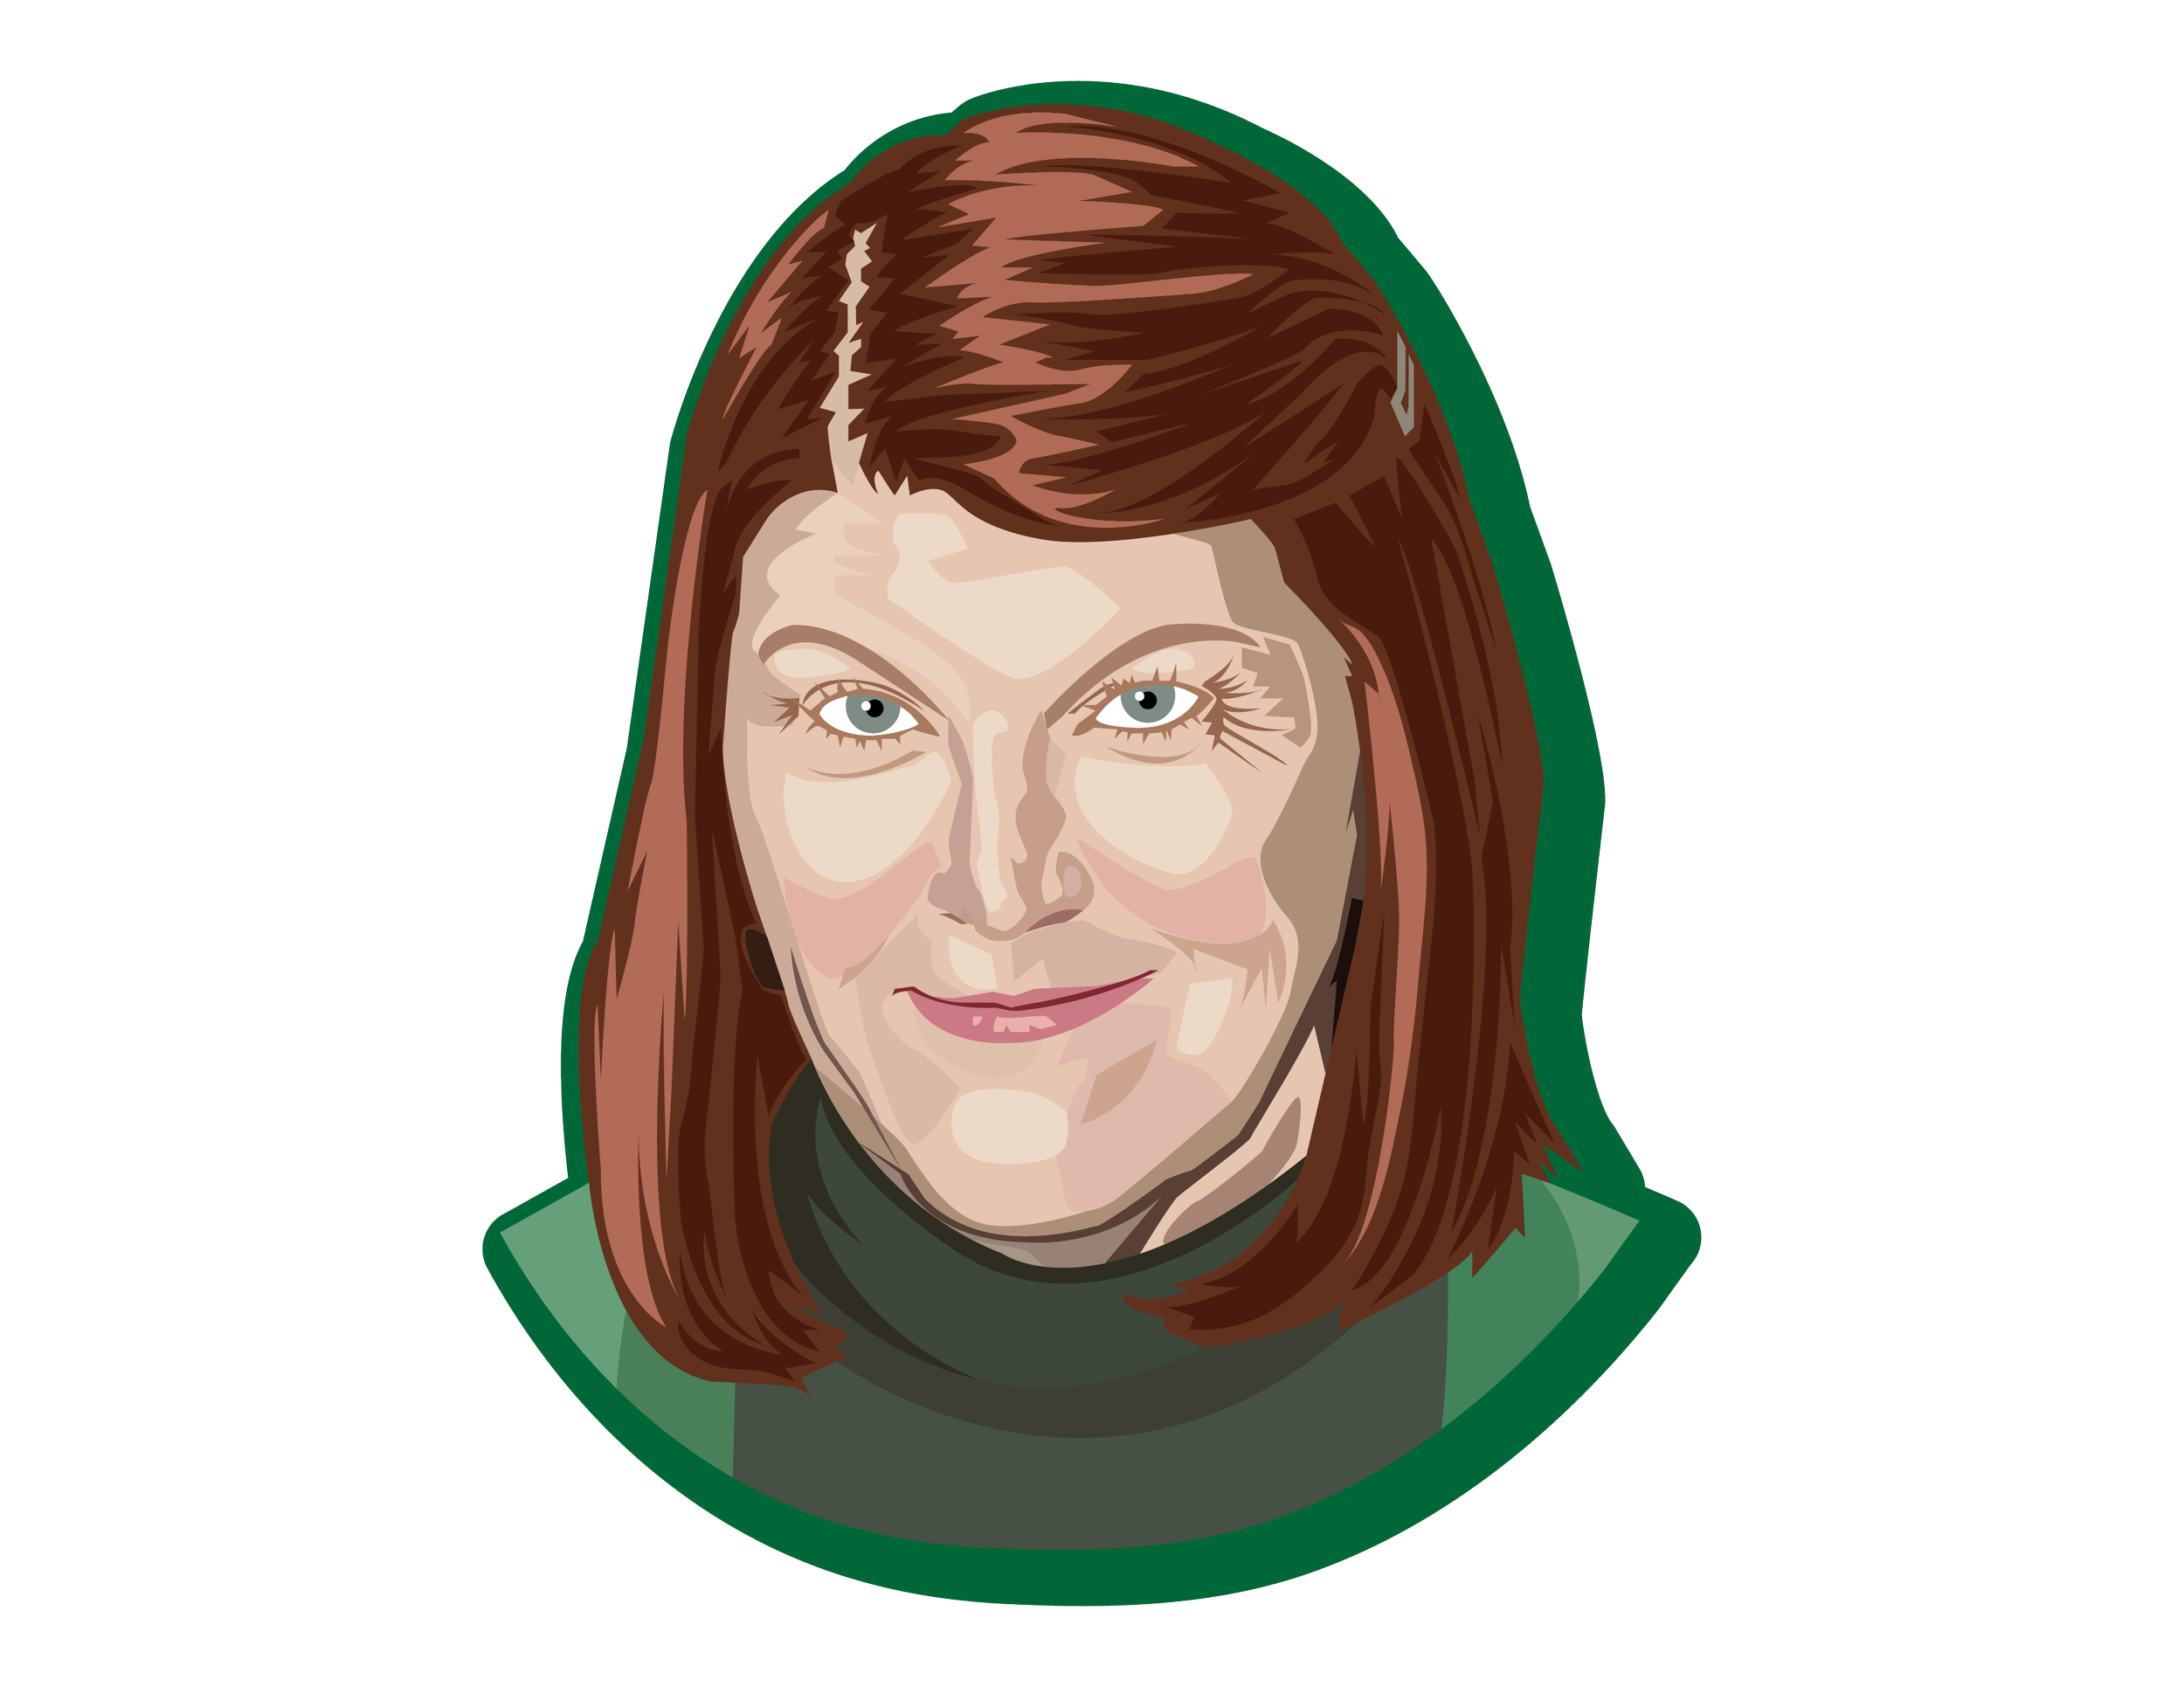 Meredith Palmer - Kate Flannery